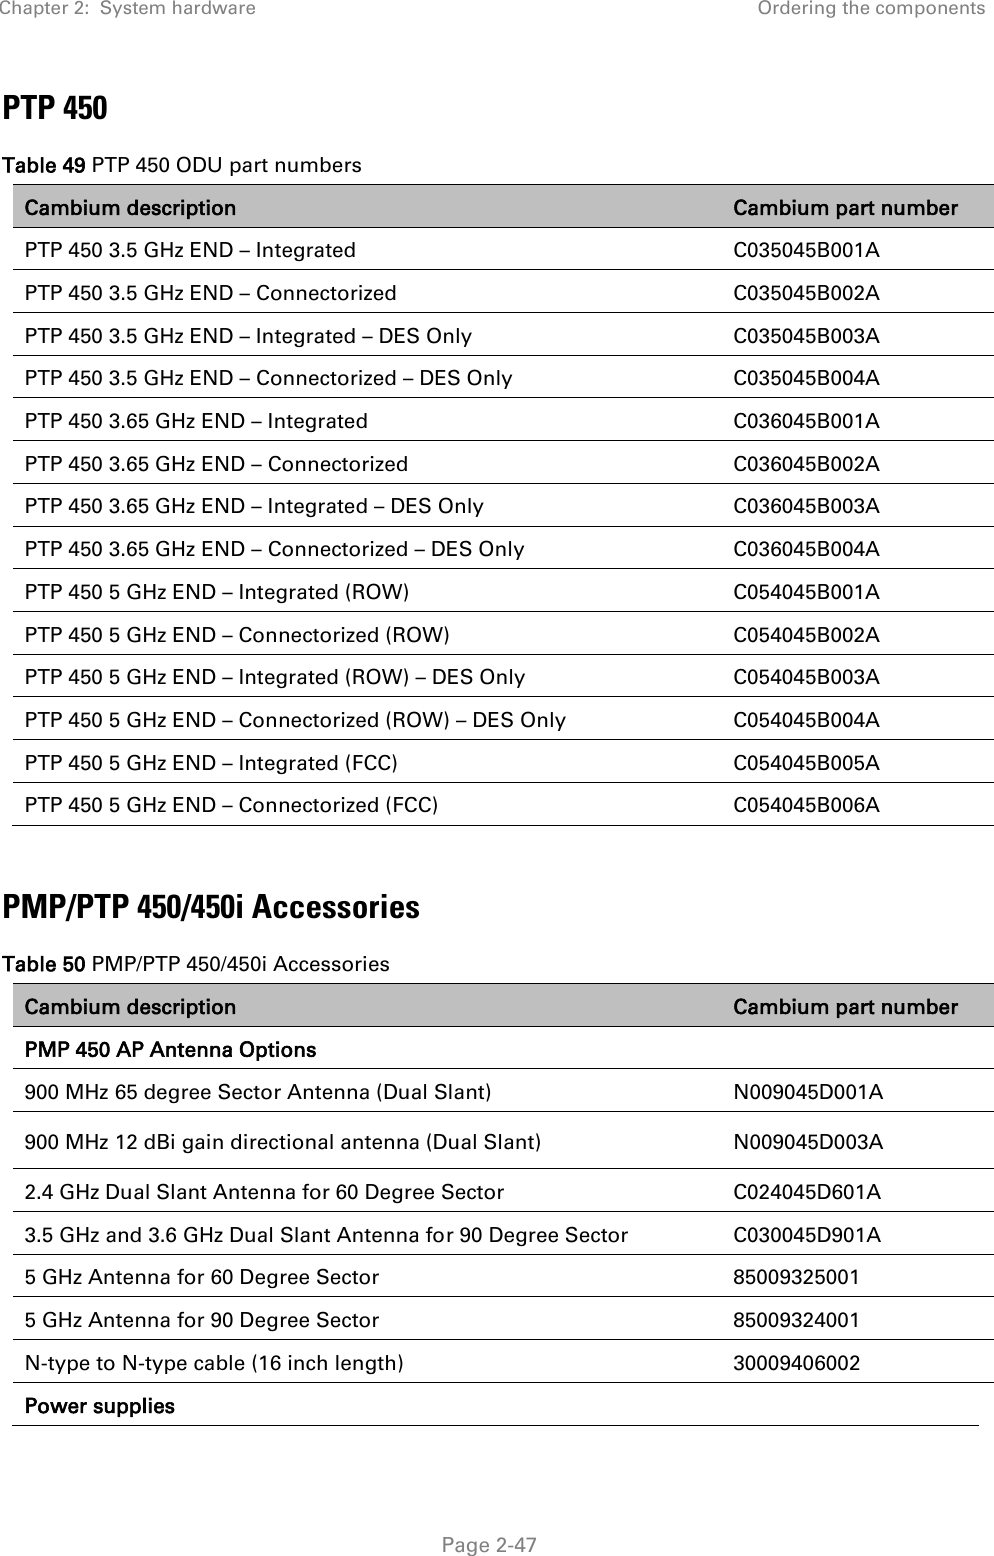 Chapter 2:  System hardware Ordering the components   Page 2-47 PTP 450 Table 49 PTP 450 ODU part numbers Cambium description Cambium part number PTP 450 3.5 GHz END – Integrated C035045B001A PTP 450 3.5 GHz END – Connectorized C035045B002A PTP 450 3.5 GHz END – Integrated – DES Only C035045B003A PTP 450 3.5 GHz END – Connectorized – DES Only C035045B004A PTP 450 3.65 GHz END – Integrated C036045B001A PTP 450 3.65 GHz END – Connectorized C036045B002A PTP 450 3.65 GHz END – Integrated – DES Only C036045B003A PTP 450 3.65 GHz END – Connectorized – DES Only C036045B004A PTP 450 5 GHz END – Integrated (ROW) C054045B001A PTP 450 5 GHz END – Connectorized (ROW) C054045B002A PTP 450 5 GHz END – Integrated (ROW) – DES Only C054045B003A PTP 450 5 GHz END – Connectorized (ROW) – DES Only C054045B004A PTP 450 5 GHz END – Integrated (FCC) C054045B005A PTP 450 5 GHz END – Connectorized (FCC) C054045B006A  PMP/PTP 450/450i Accessories Table 50 PMP/PTP 450/450i Accessories Cambium description Cambium part number PMP 450 AP Antenna Options  900 MHz 65 degree Sector Antenna (Dual Slant) N009045D001A 900 MHz 12 dBi gain directional antenna (Dual Slant) N009045D003A 2.4 GHz Dual Slant Antenna for 60 Degree Sector C024045D601A 3.5 GHz and 3.6 GHz Dual Slant Antenna for 90 Degree Sector C030045D901A 5 GHz Antenna for 60 Degree Sector 85009325001 5 GHz Antenna for 90 Degree Sector 85009324001 N-type to N-type cable (16 inch length) 30009406002 Power supplies  